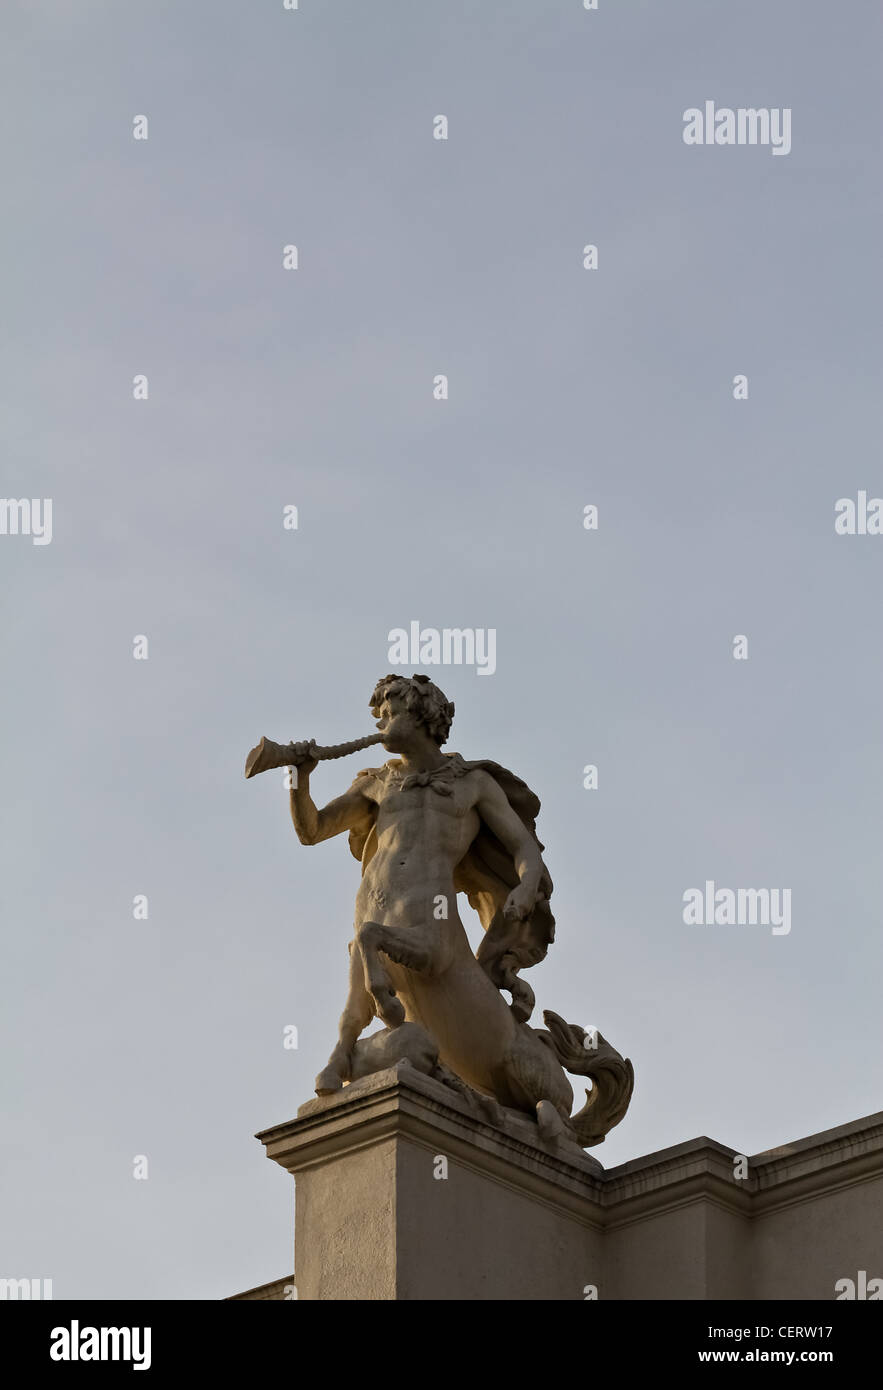 A minotaur sculpture indicating to play a trumpet-like instrument on Vienna's burgtheater Stock Photo